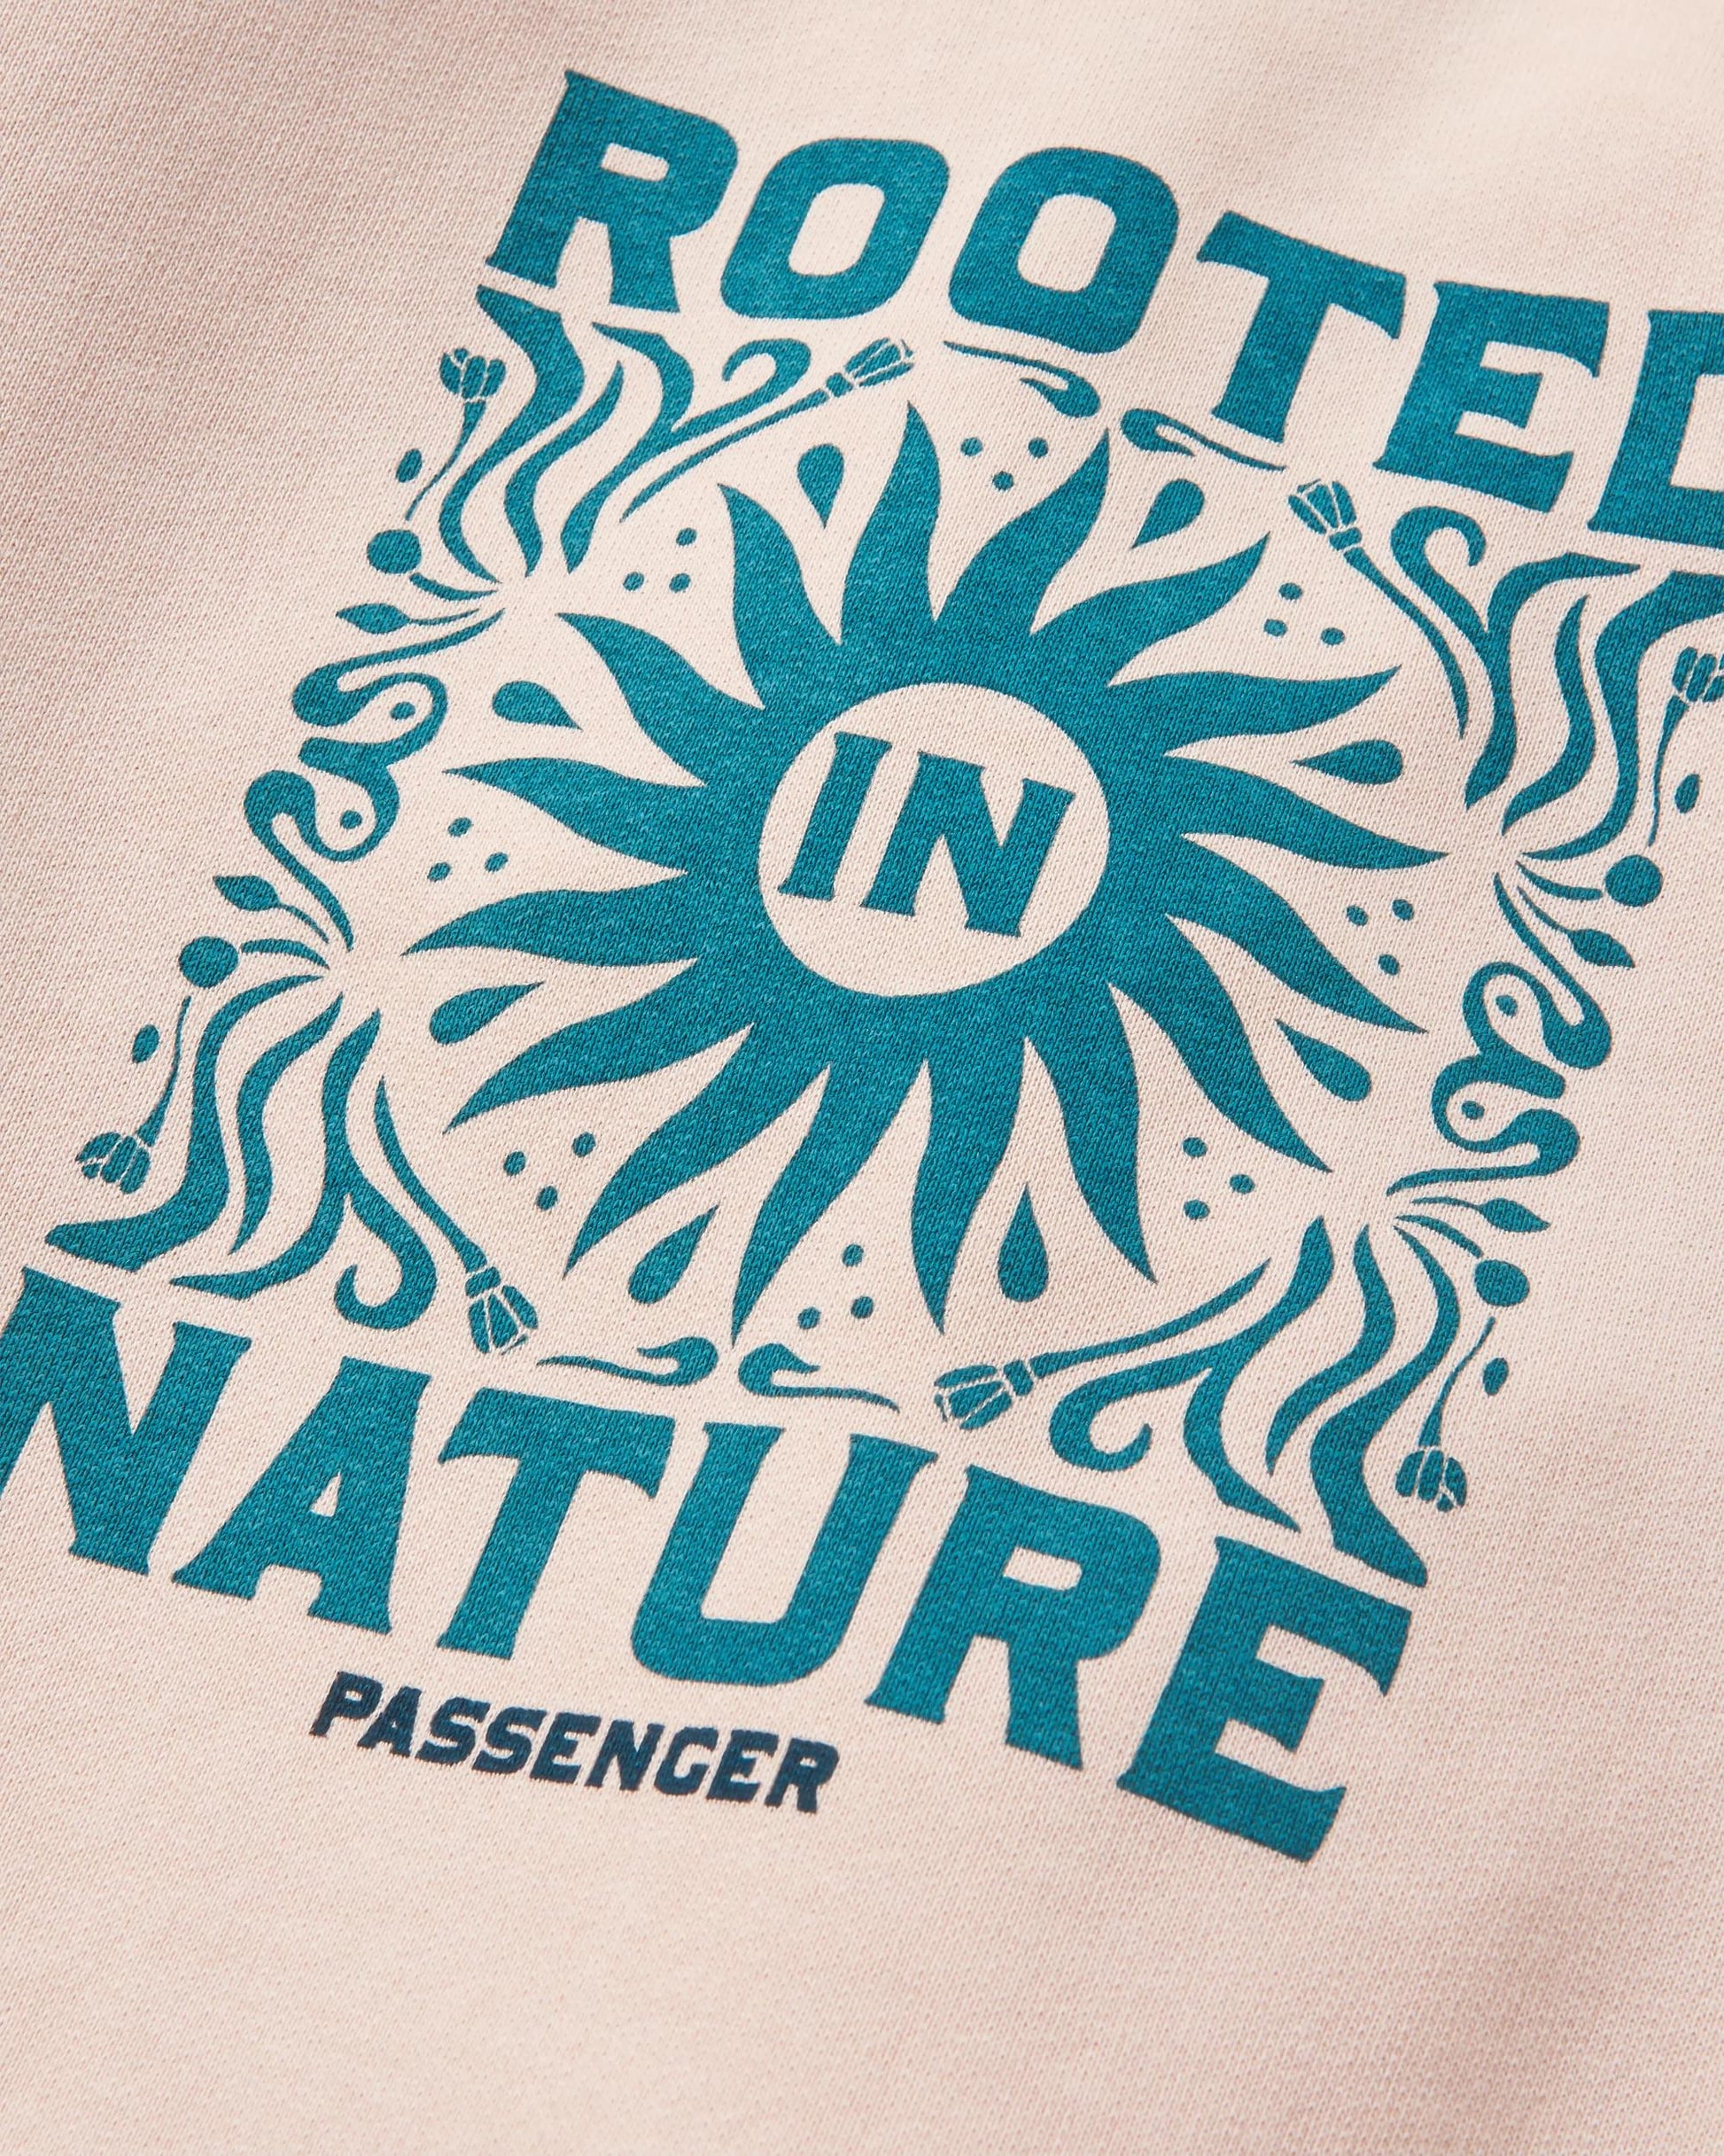 Rooted In Nature Hoodie - Peach Whip